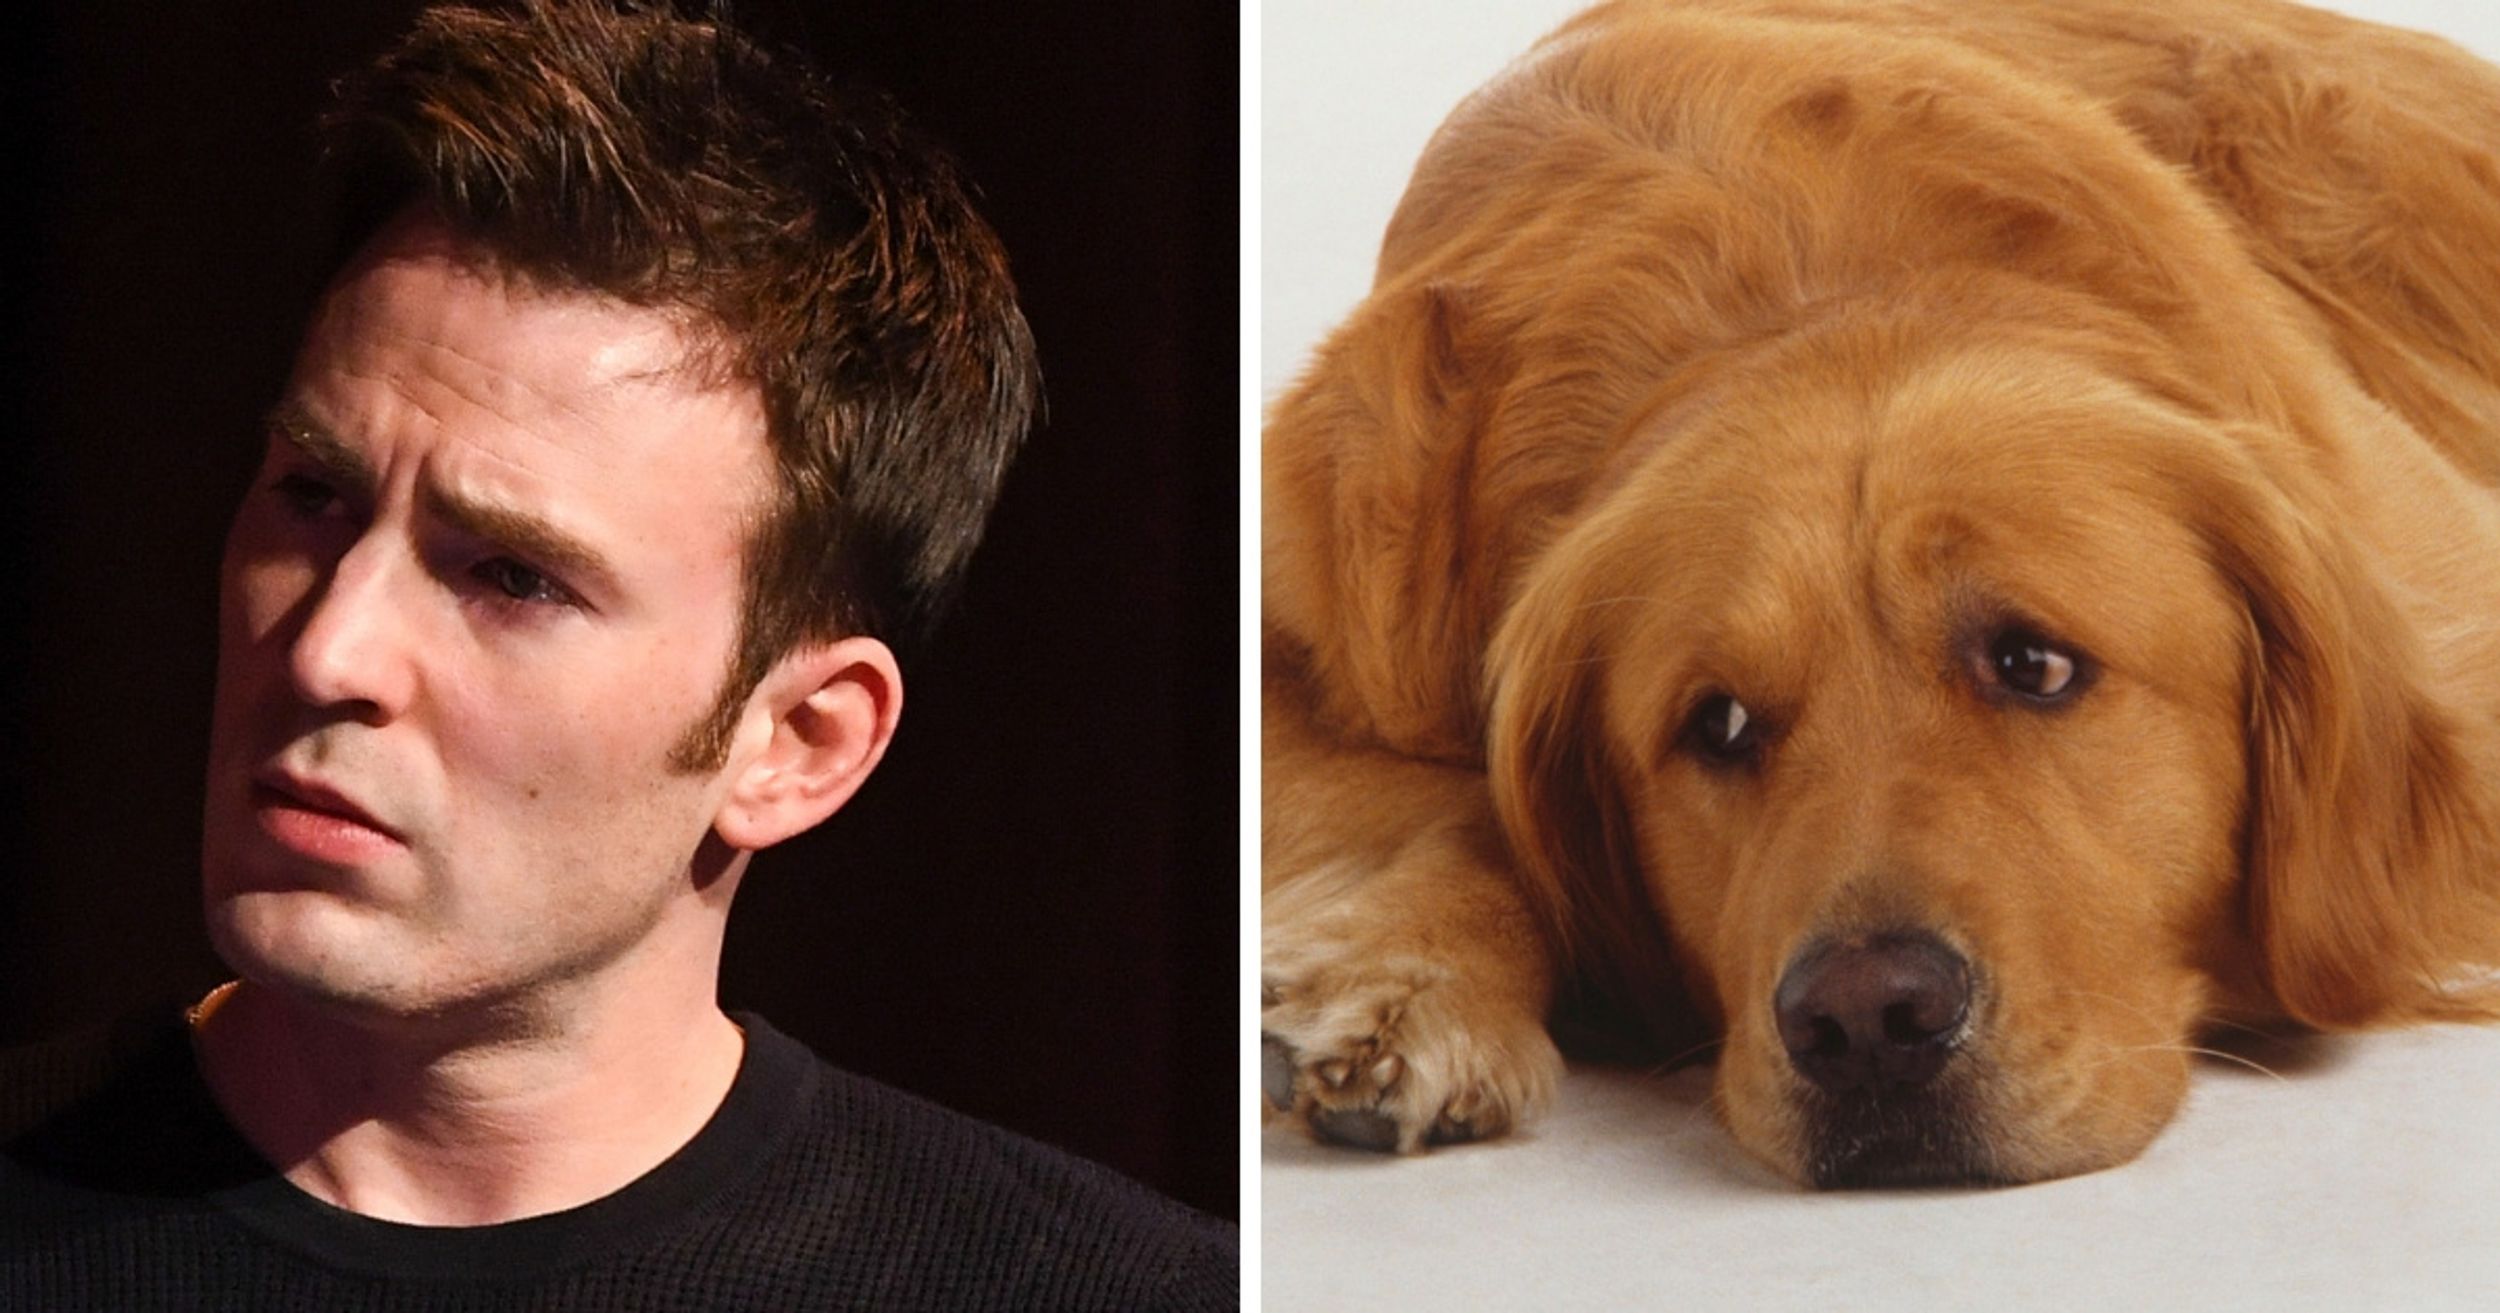 There's A Twitter Account Dedicated To Comparing Chris Evans To Golden Retrievers—And They're Onto Something